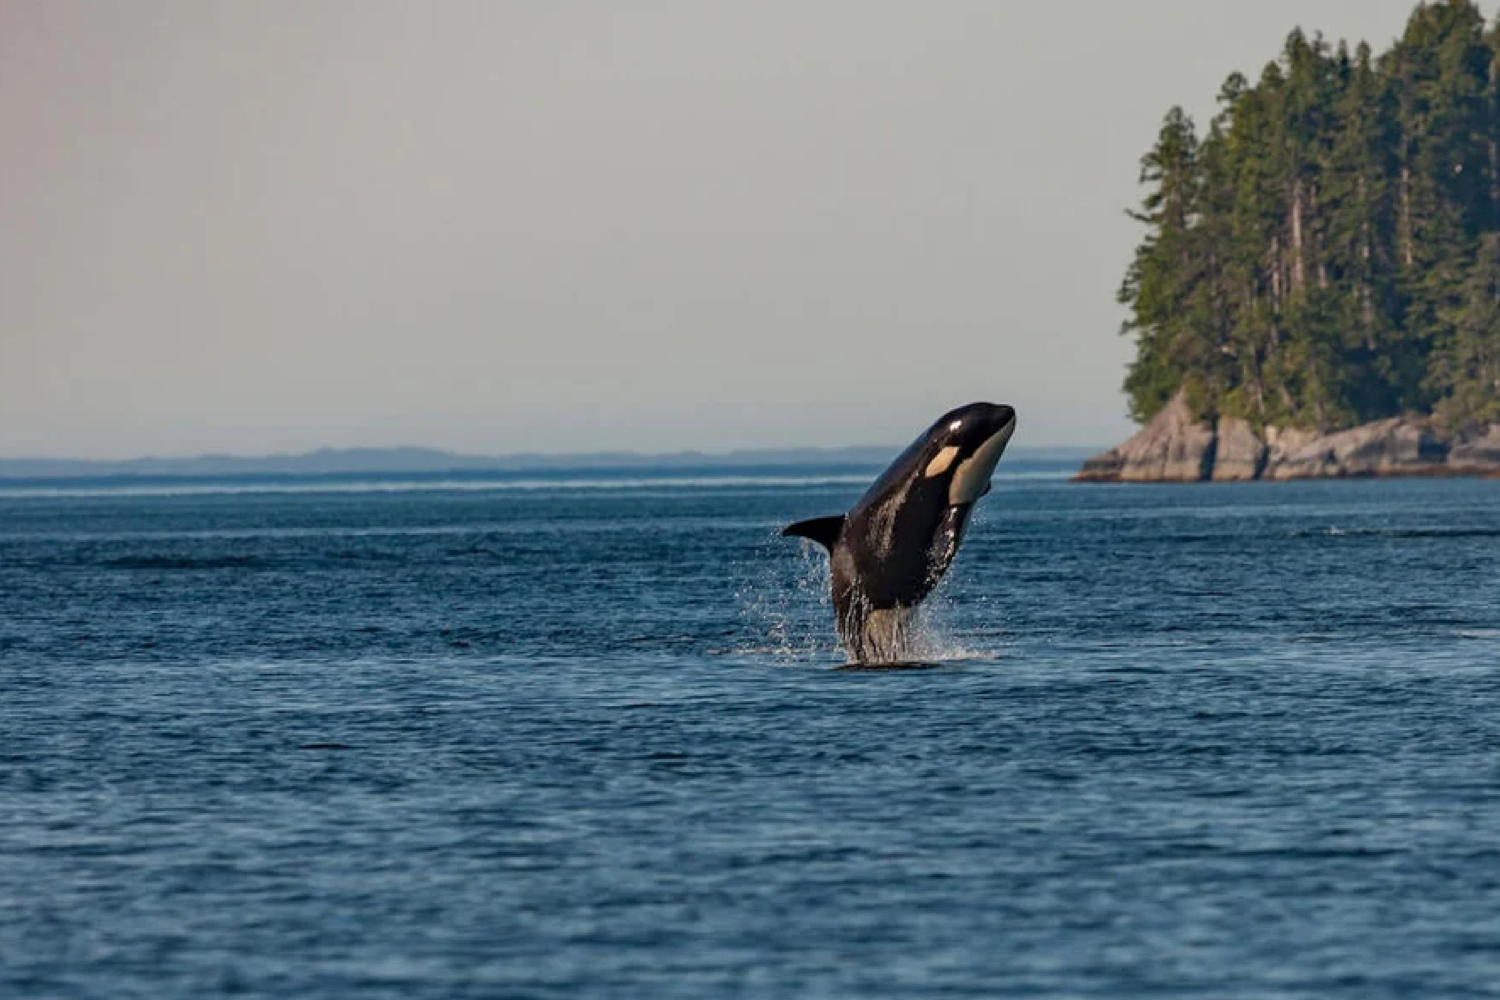 Donations: Orcas, Salmon & trees